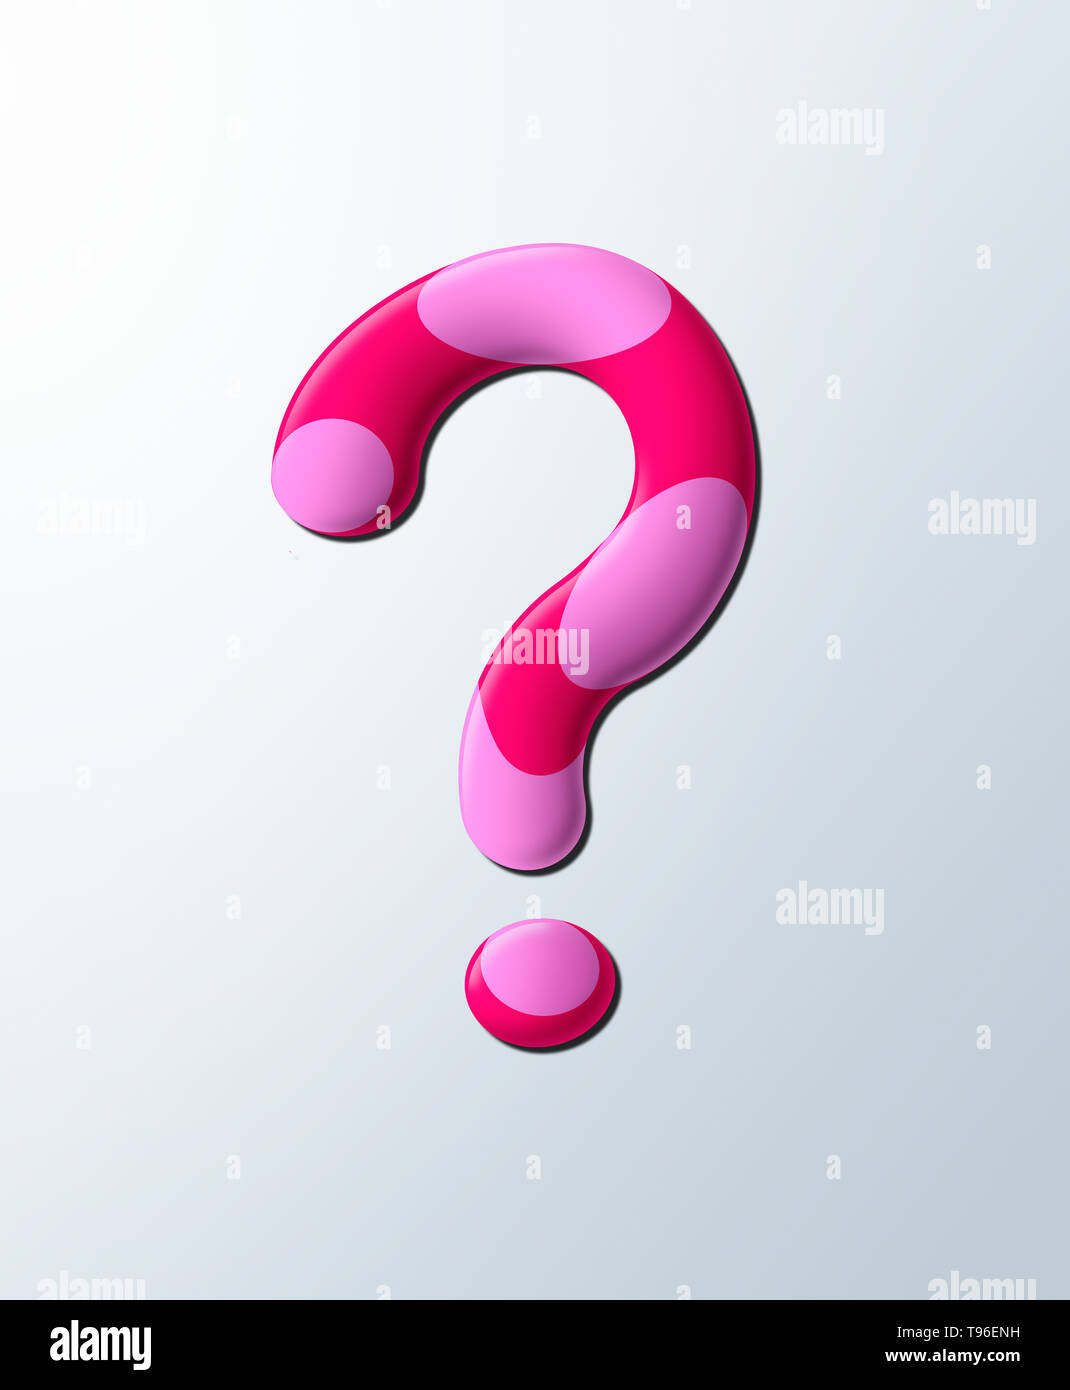 Red and Pink question mark of Nail Polish, Lacquer, Paint, Cosmetics, against white background Stock Photo